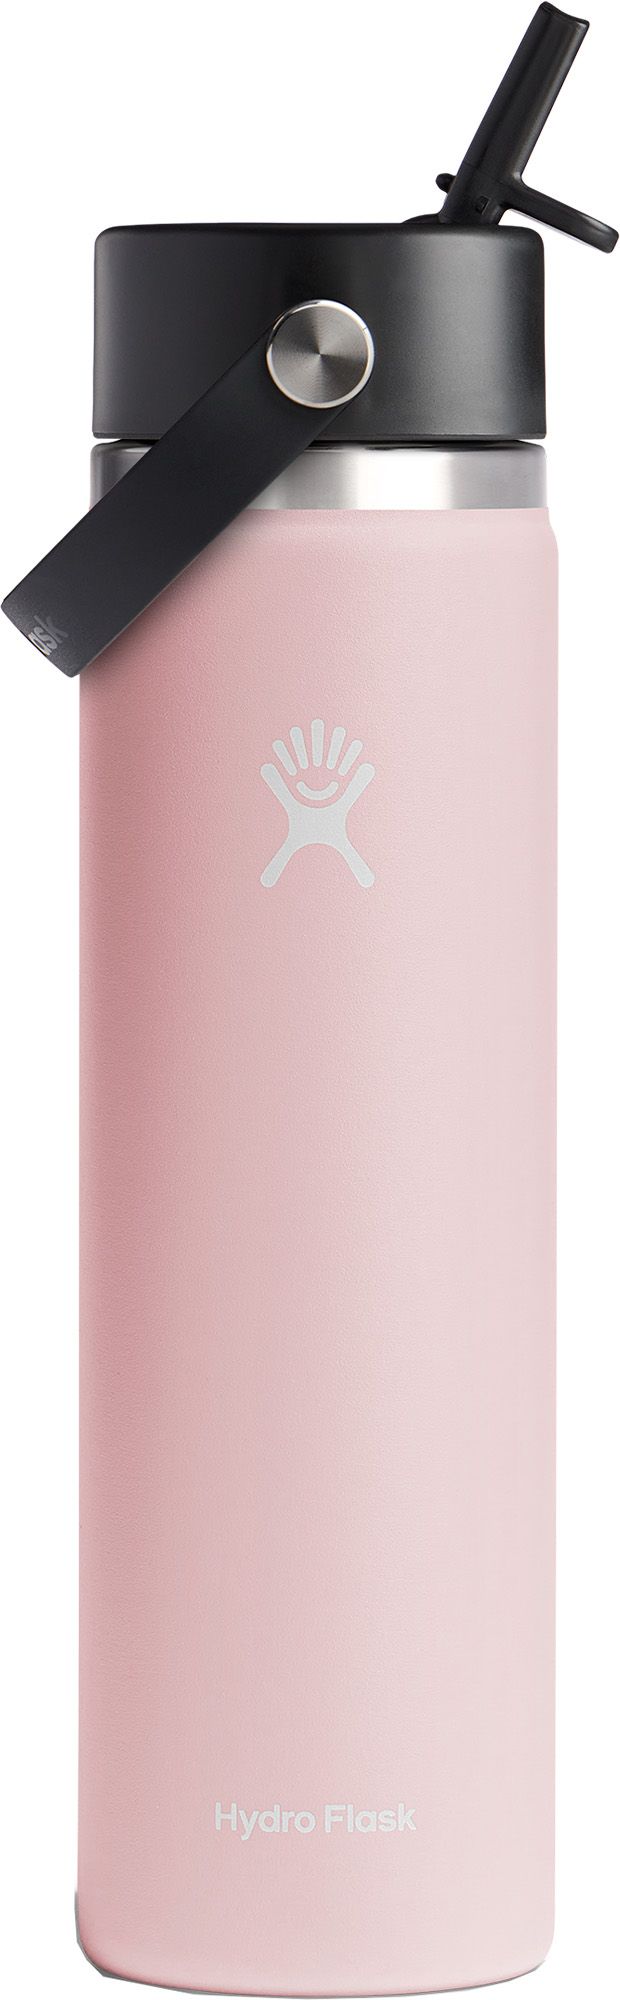 Hydro Flask oz. Wide Mouth Bottle with Flex Straw Cap